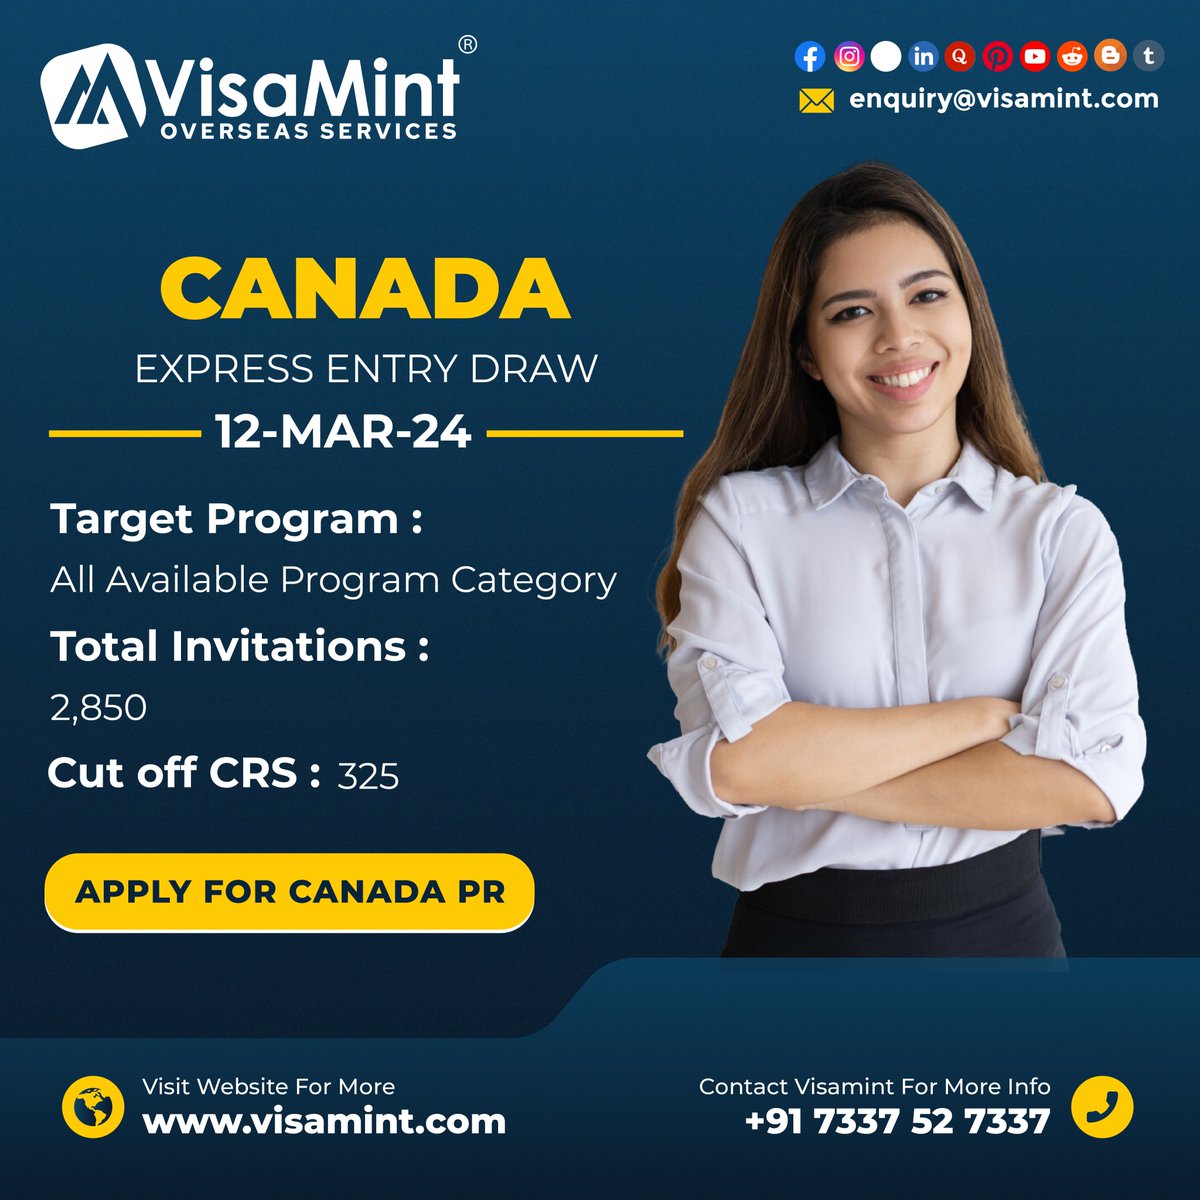 Canada conducted a New Draw and issued 2,850 invitations to Apply under all available program categories.

#ExpressEntry #CanadaImmigration #PRCanada #CanadianDream #ImmigrateToCanada #CanadaVisa #PermanentResidence #ExpressEntrySystem #CanadianPR #CanadaOpportunity